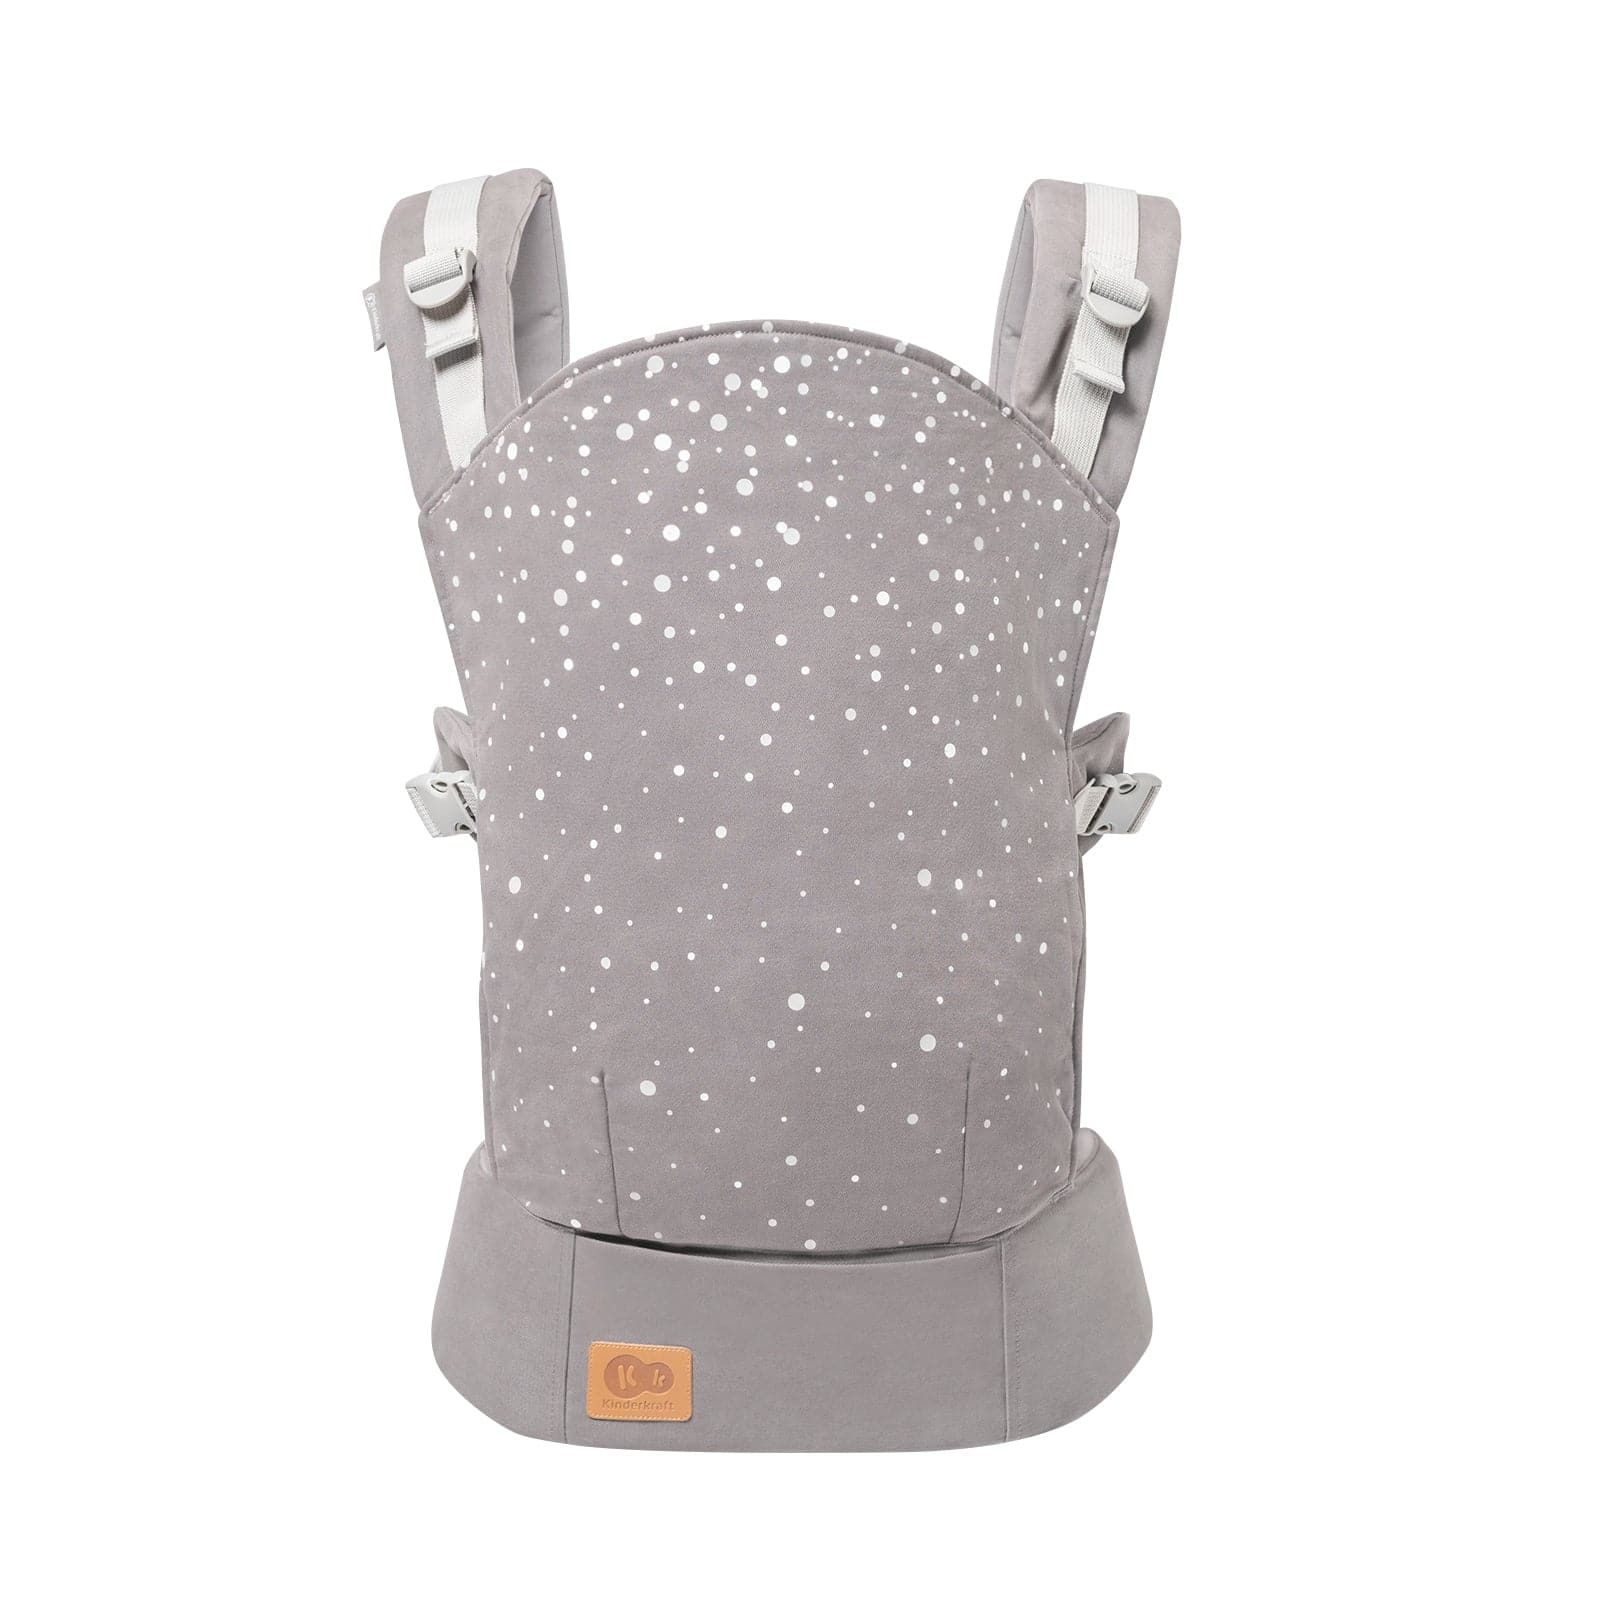 Kinderkraft Nino Baby Carrier Confetti Grey -  | For Your Little One